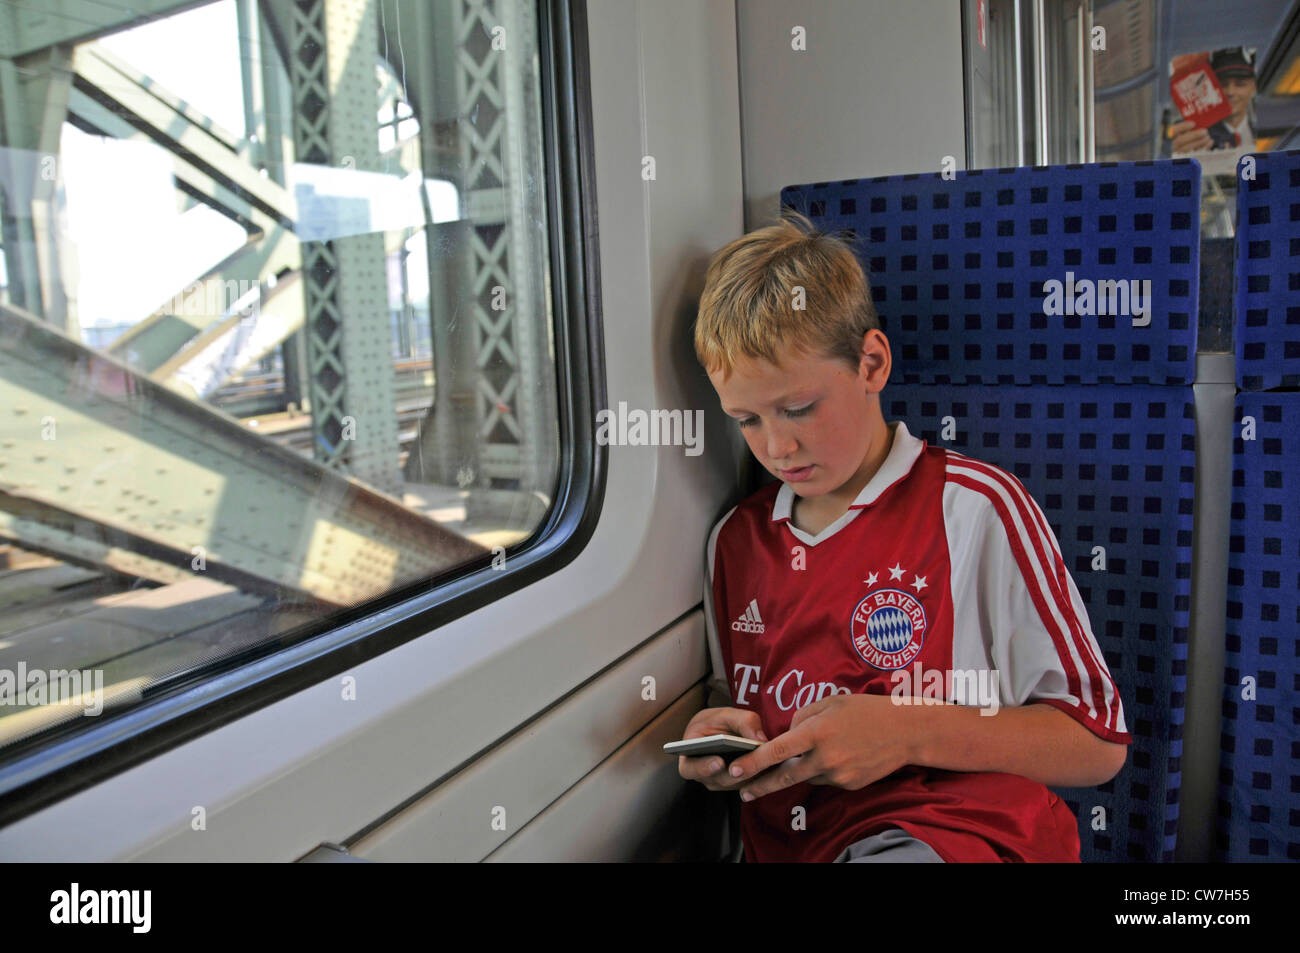 boy sitting in a train playing with his Iphone, Germany Stock Photo